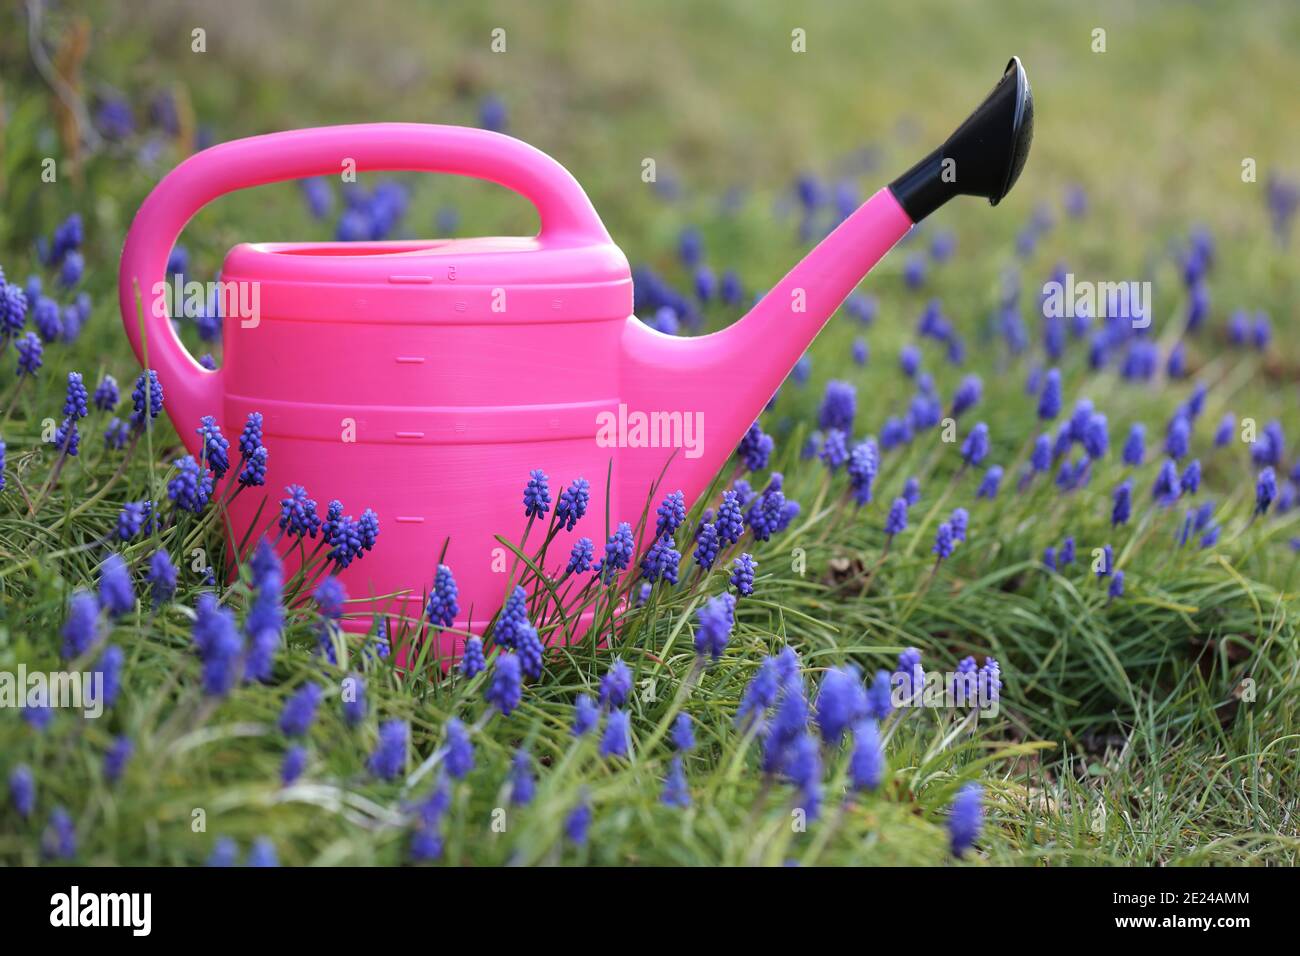 Spring garden work.Floriculture and horticulture . Muscari flowers cultivation and care. Planting and watering. Pink watering can in purple muscari Stock Photo